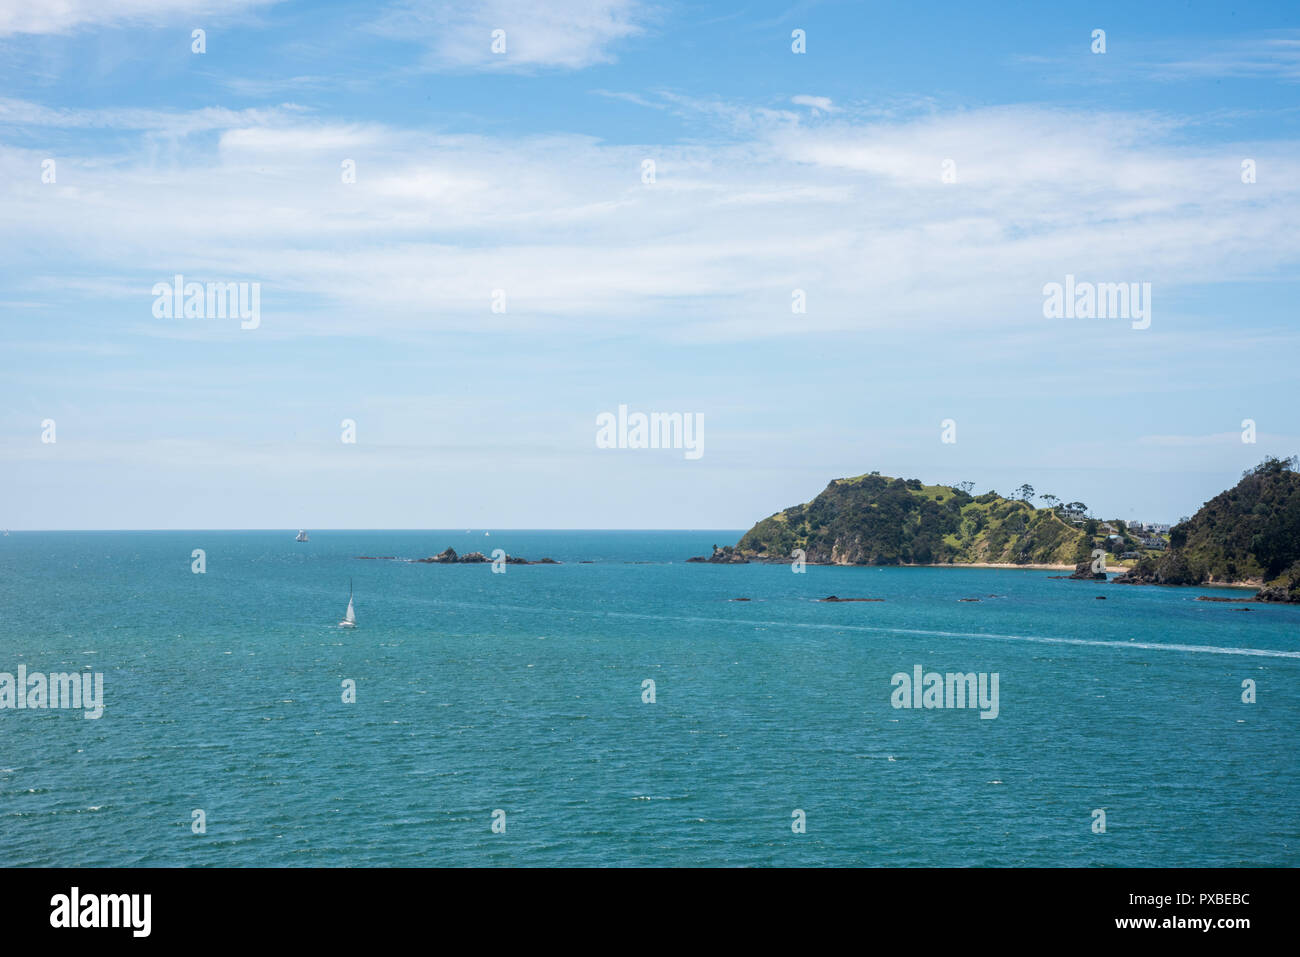 Bay of Islands, North Island, New Zealand-December 18,2016: Sailing along the coast in the turquoise Tasman Sea in the Bay of Islands, New Zealand Stock Photo